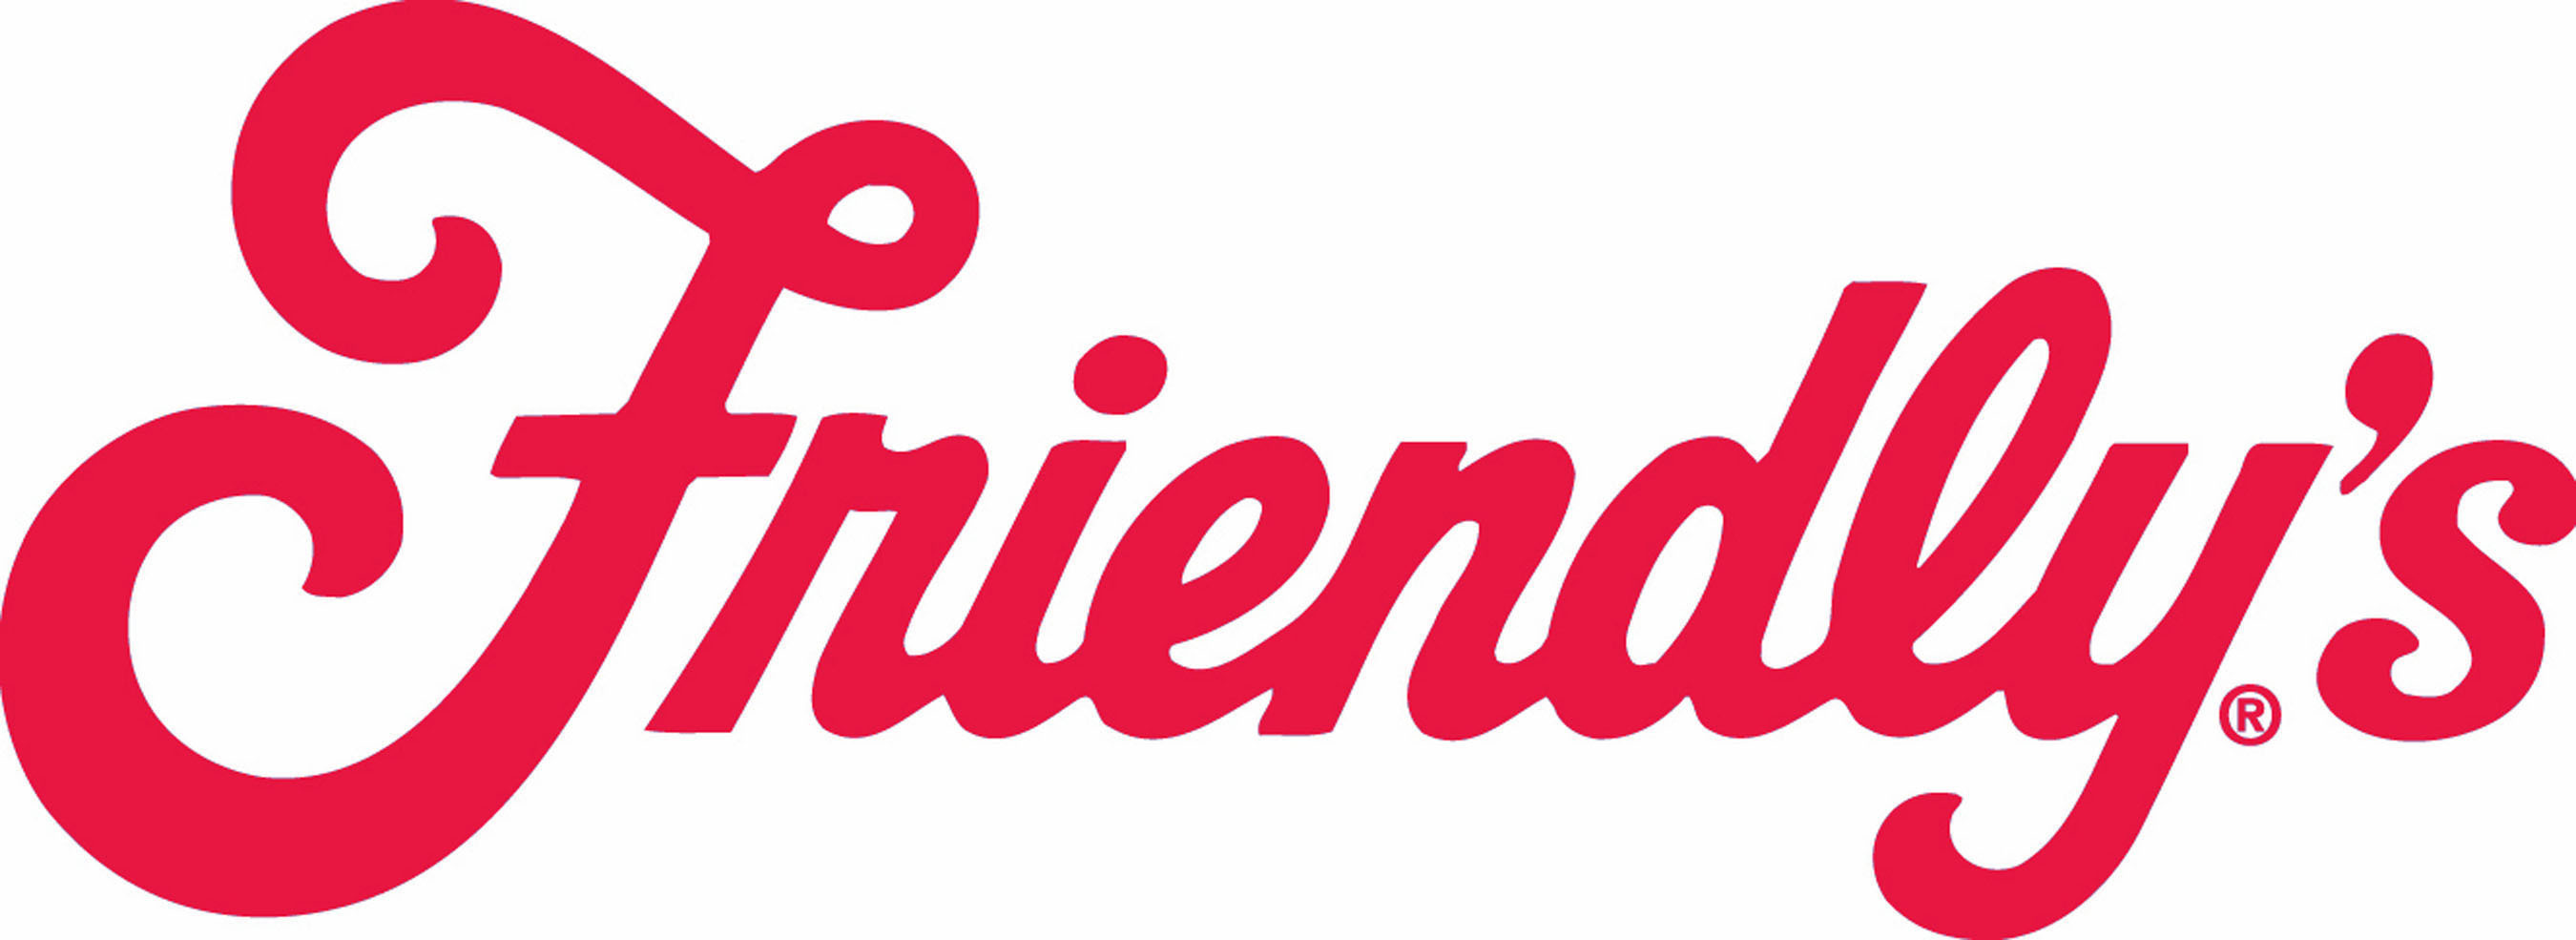 Official Logo for Friendly's Ice Cream LLC.